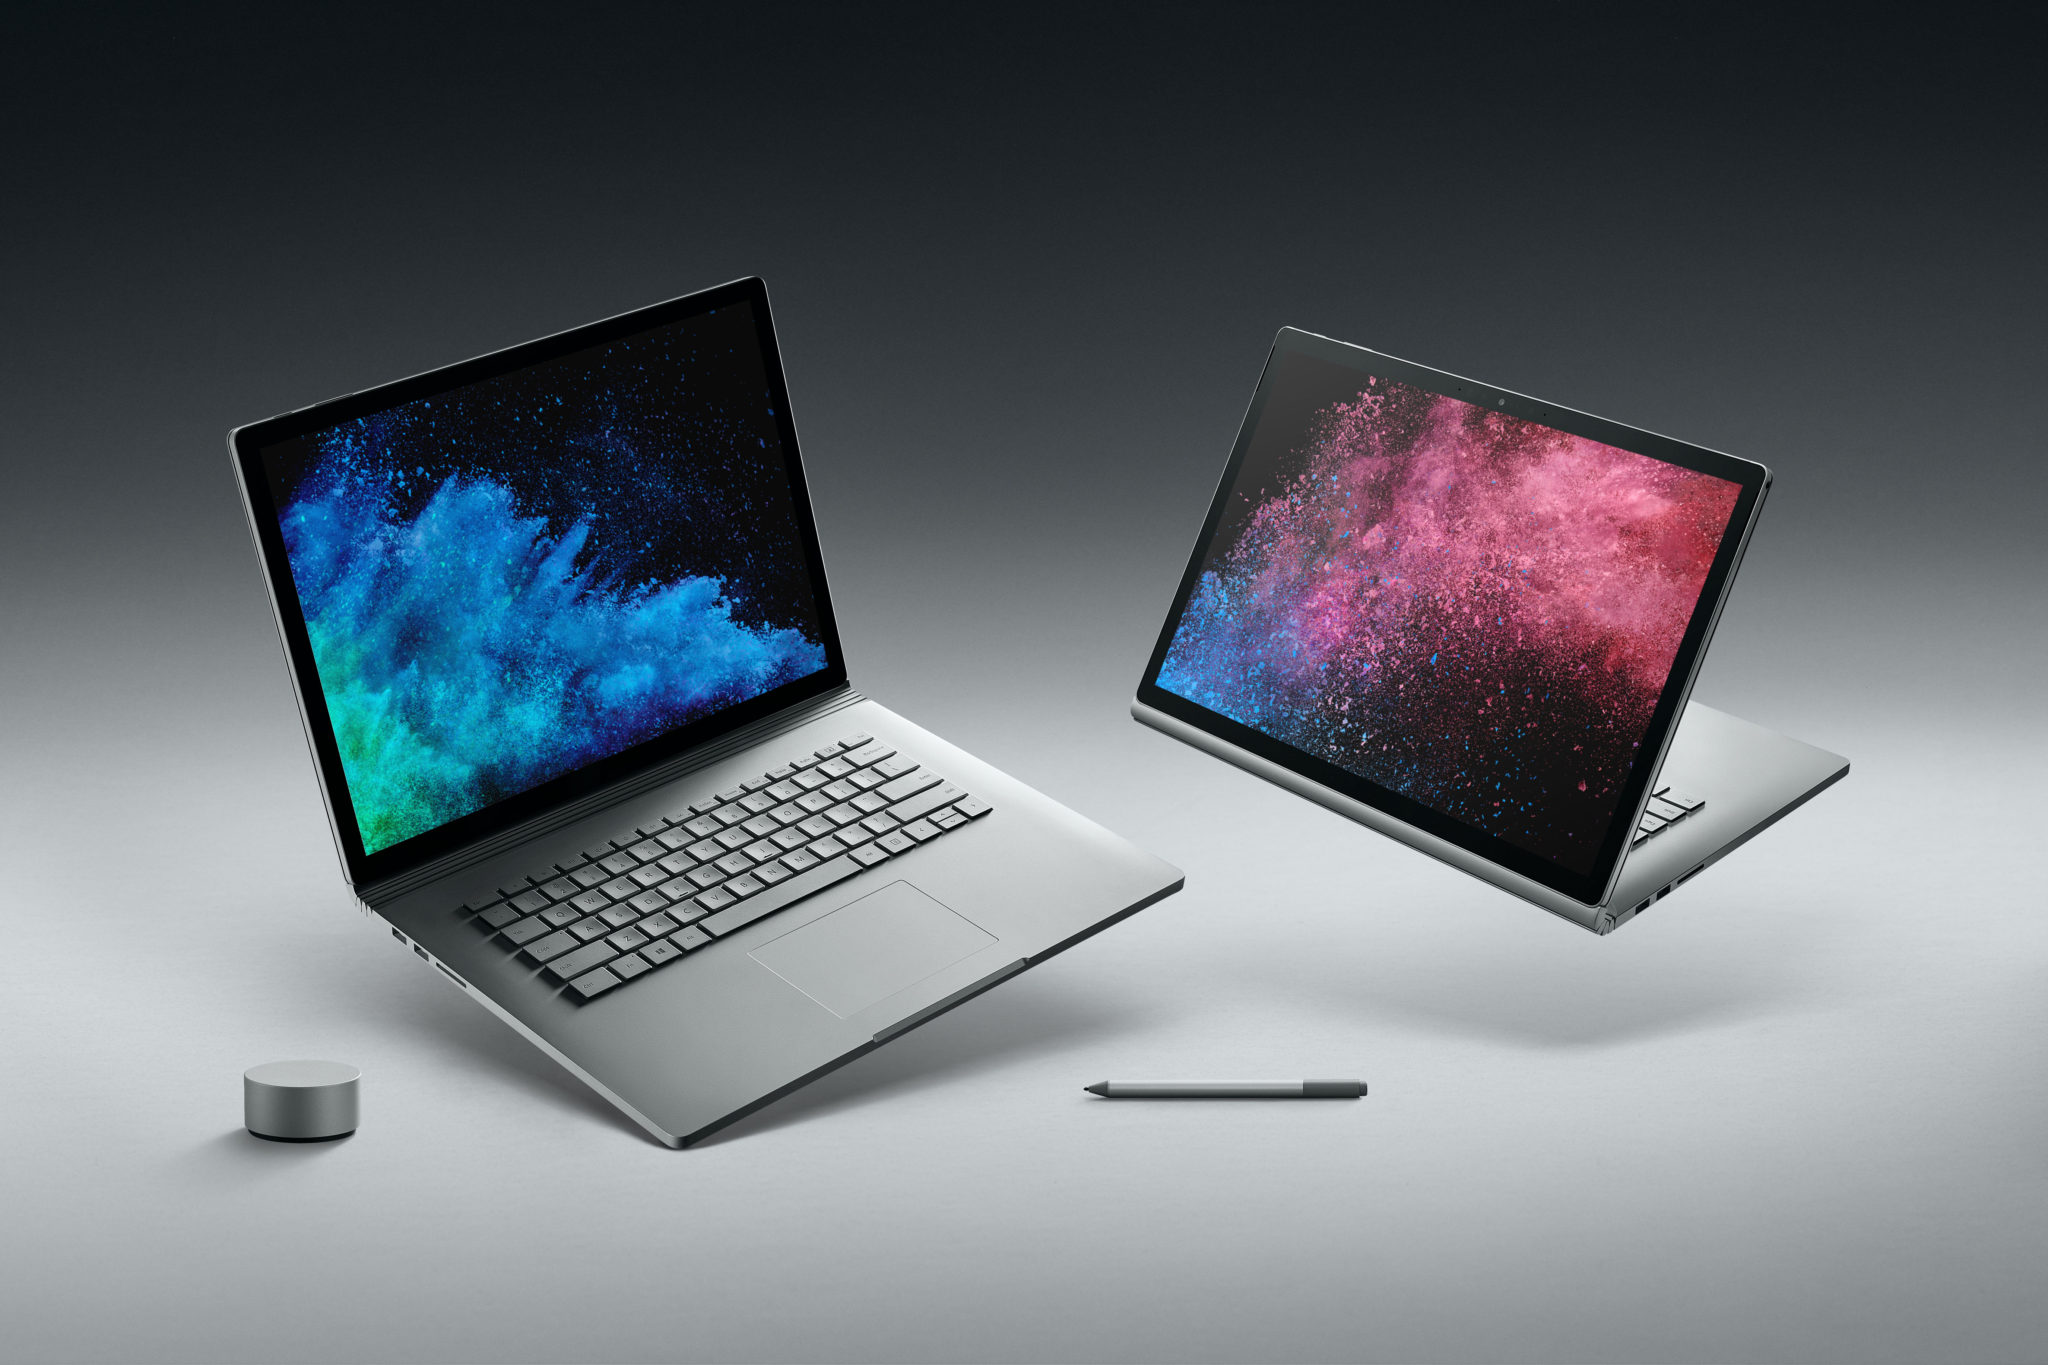 Introducing Surface Book 2, the most powerful Surface Book ever